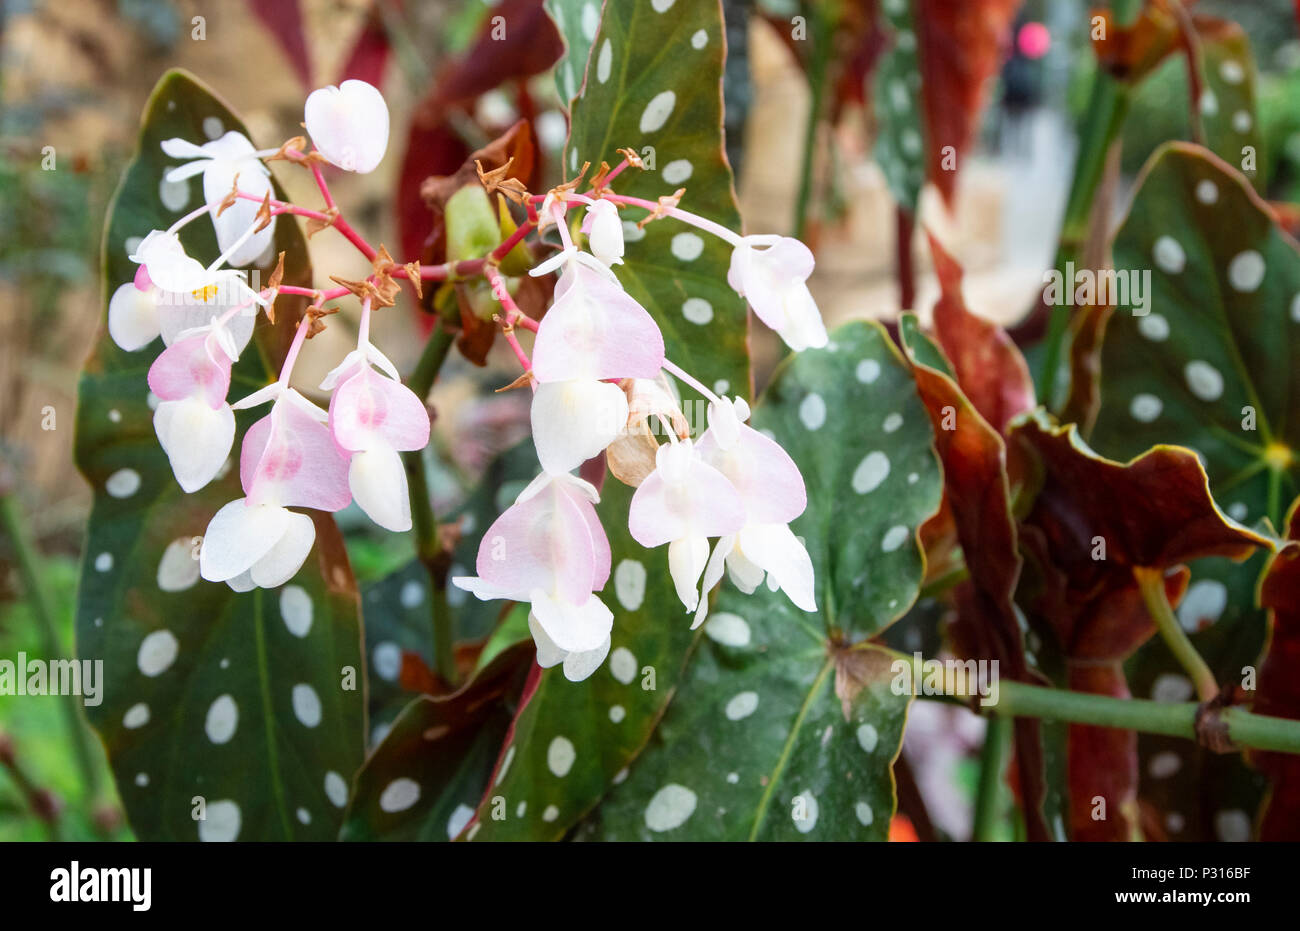 Begonia Maculata Wightii in flower with white-pink flowers and green and red spotted leaves Stock Photo